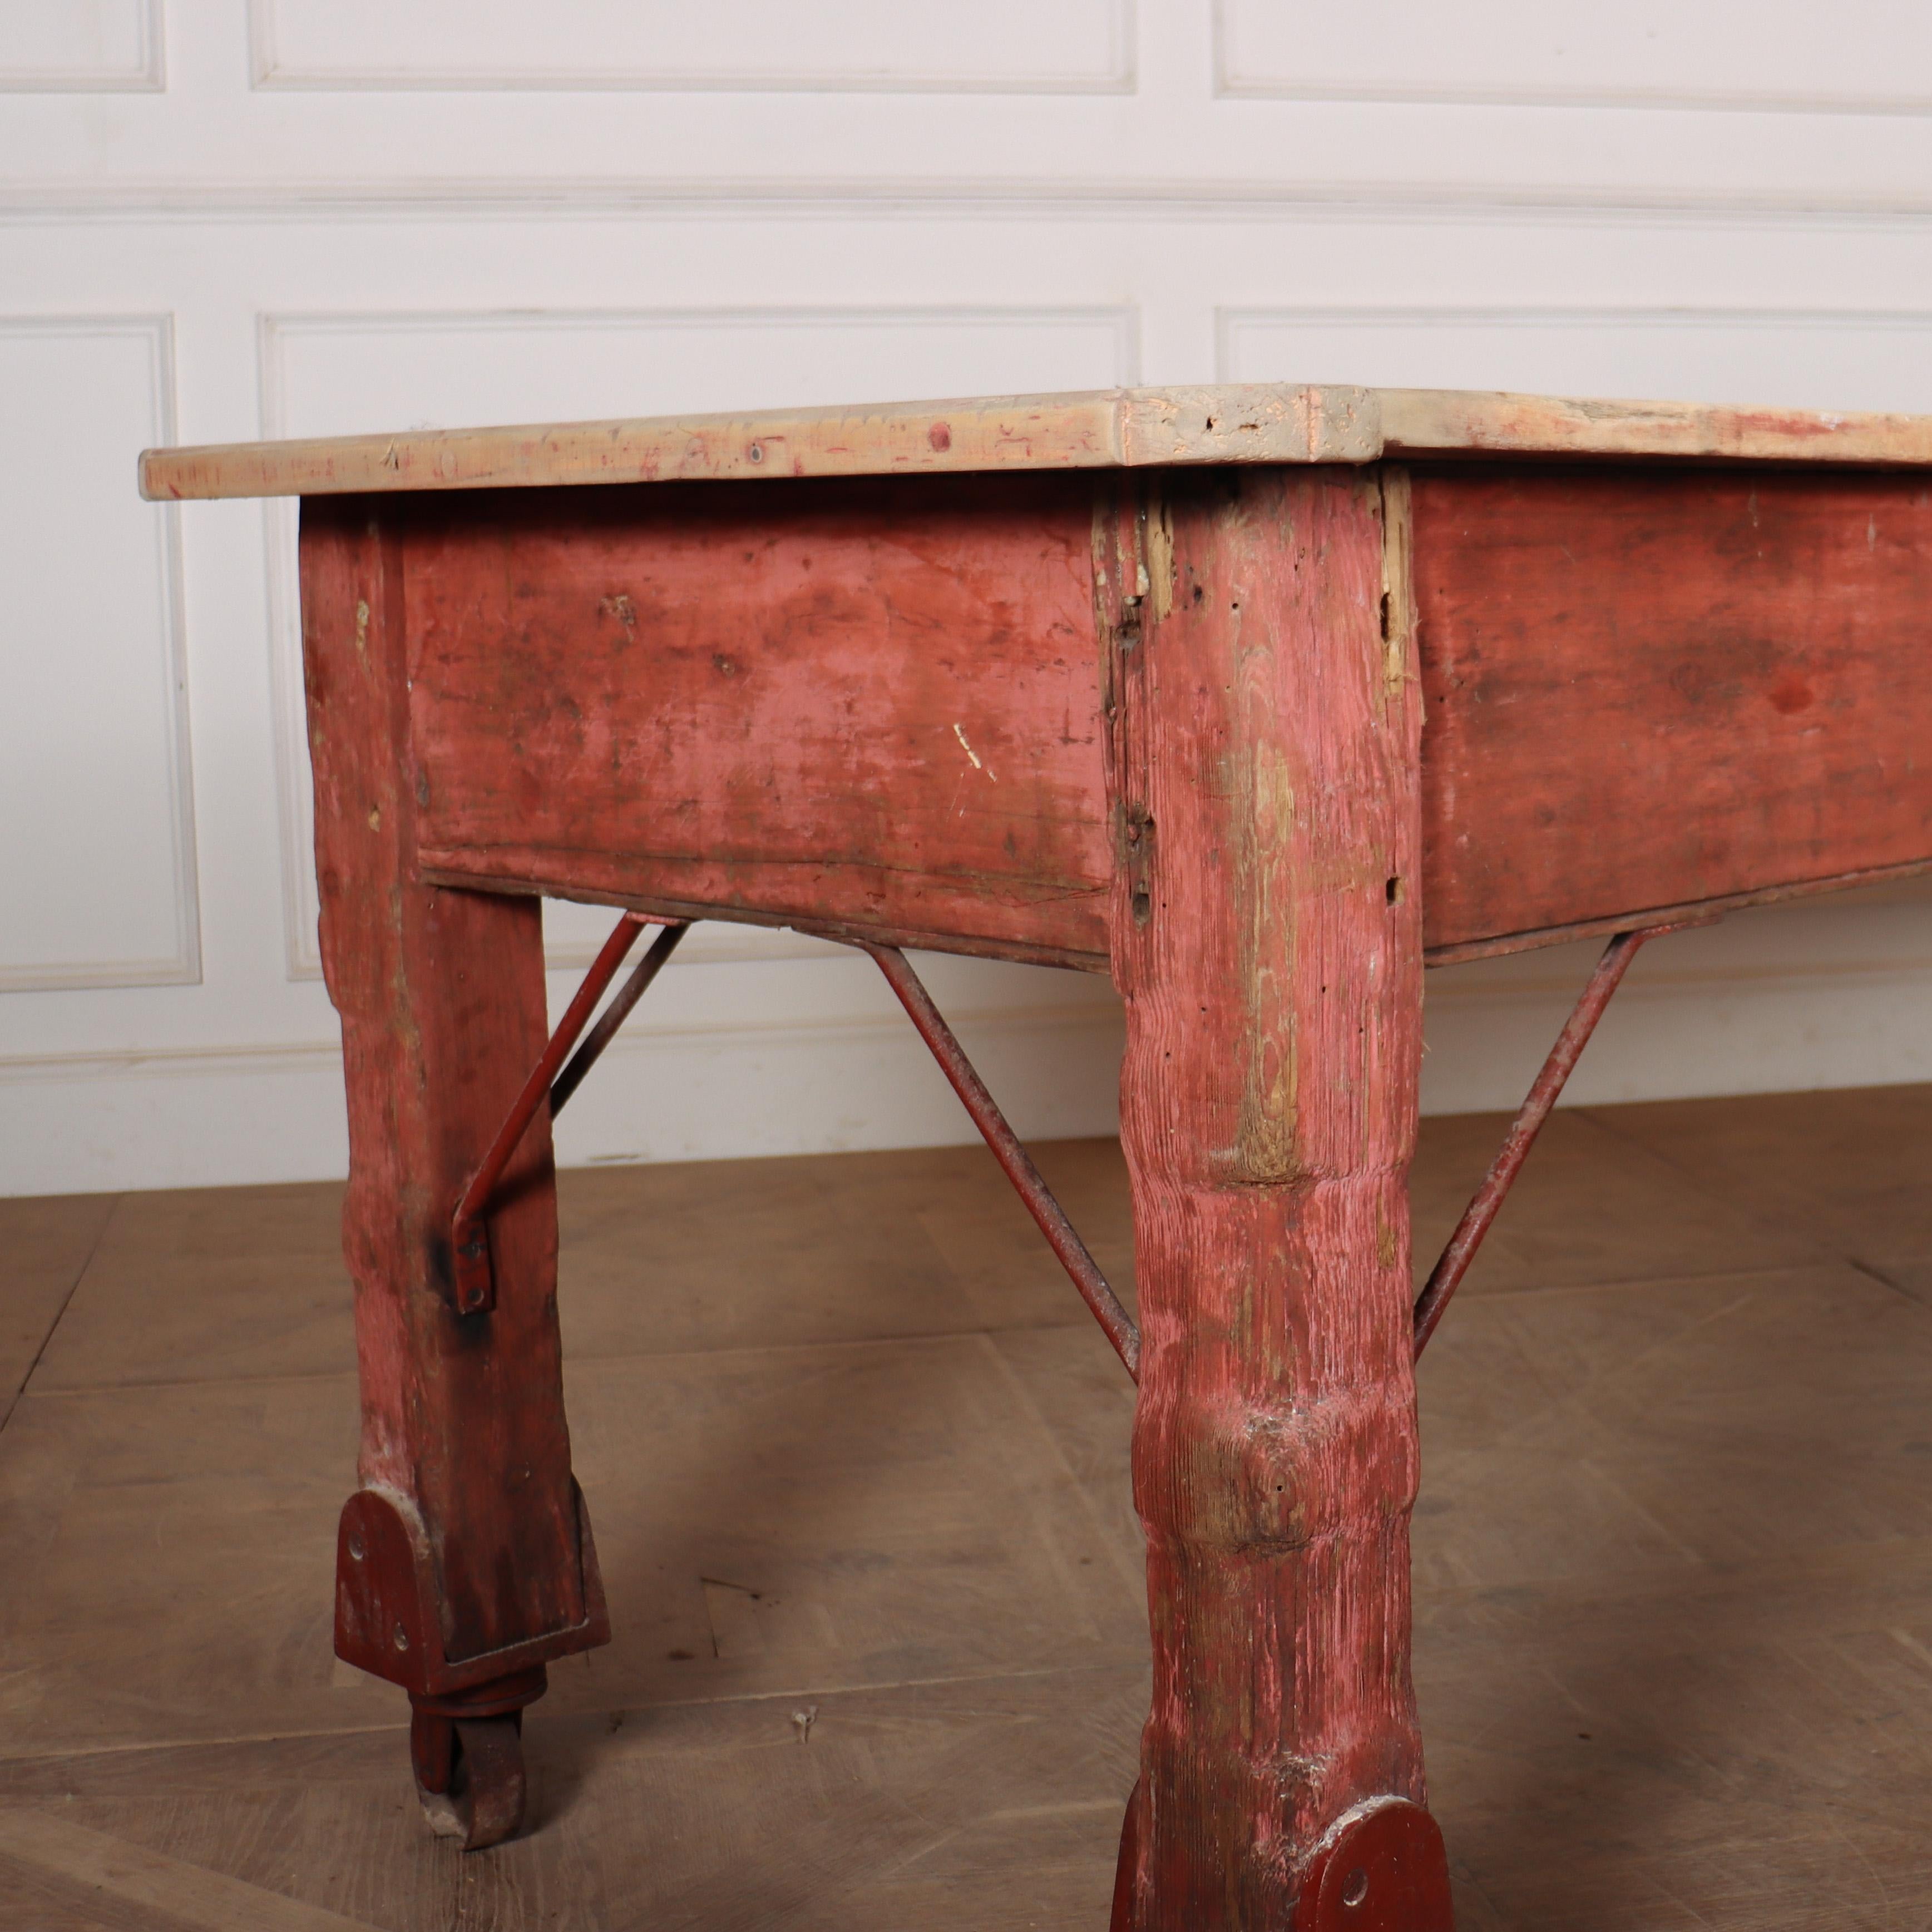 Stunning 19th C sycamore topped preparation table with an original paint finish to the base and large industrial castors. Great wear to the whole piece but very stable and functional. 1880.

Clearance is 24